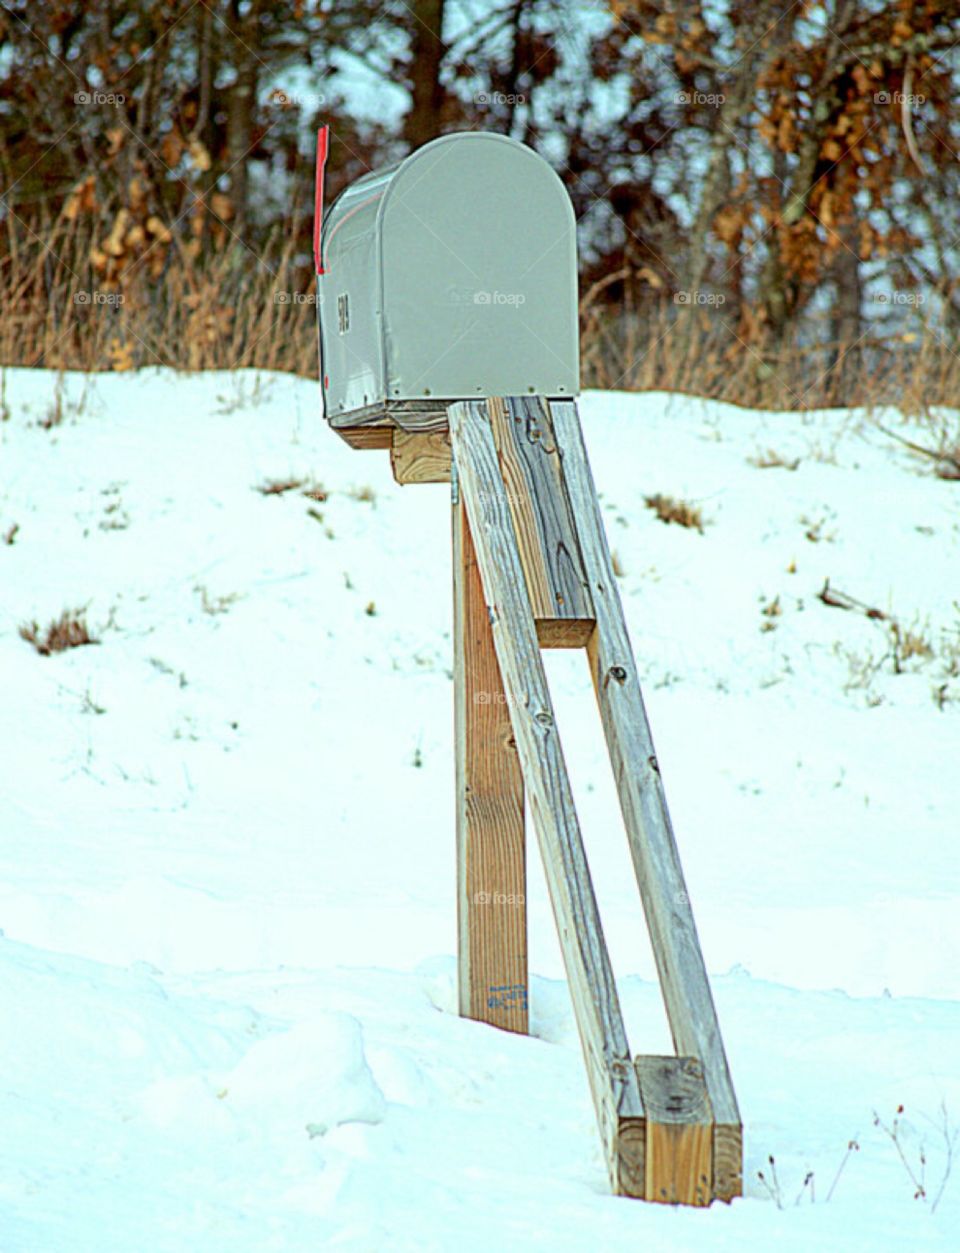 Mail box in the winter
